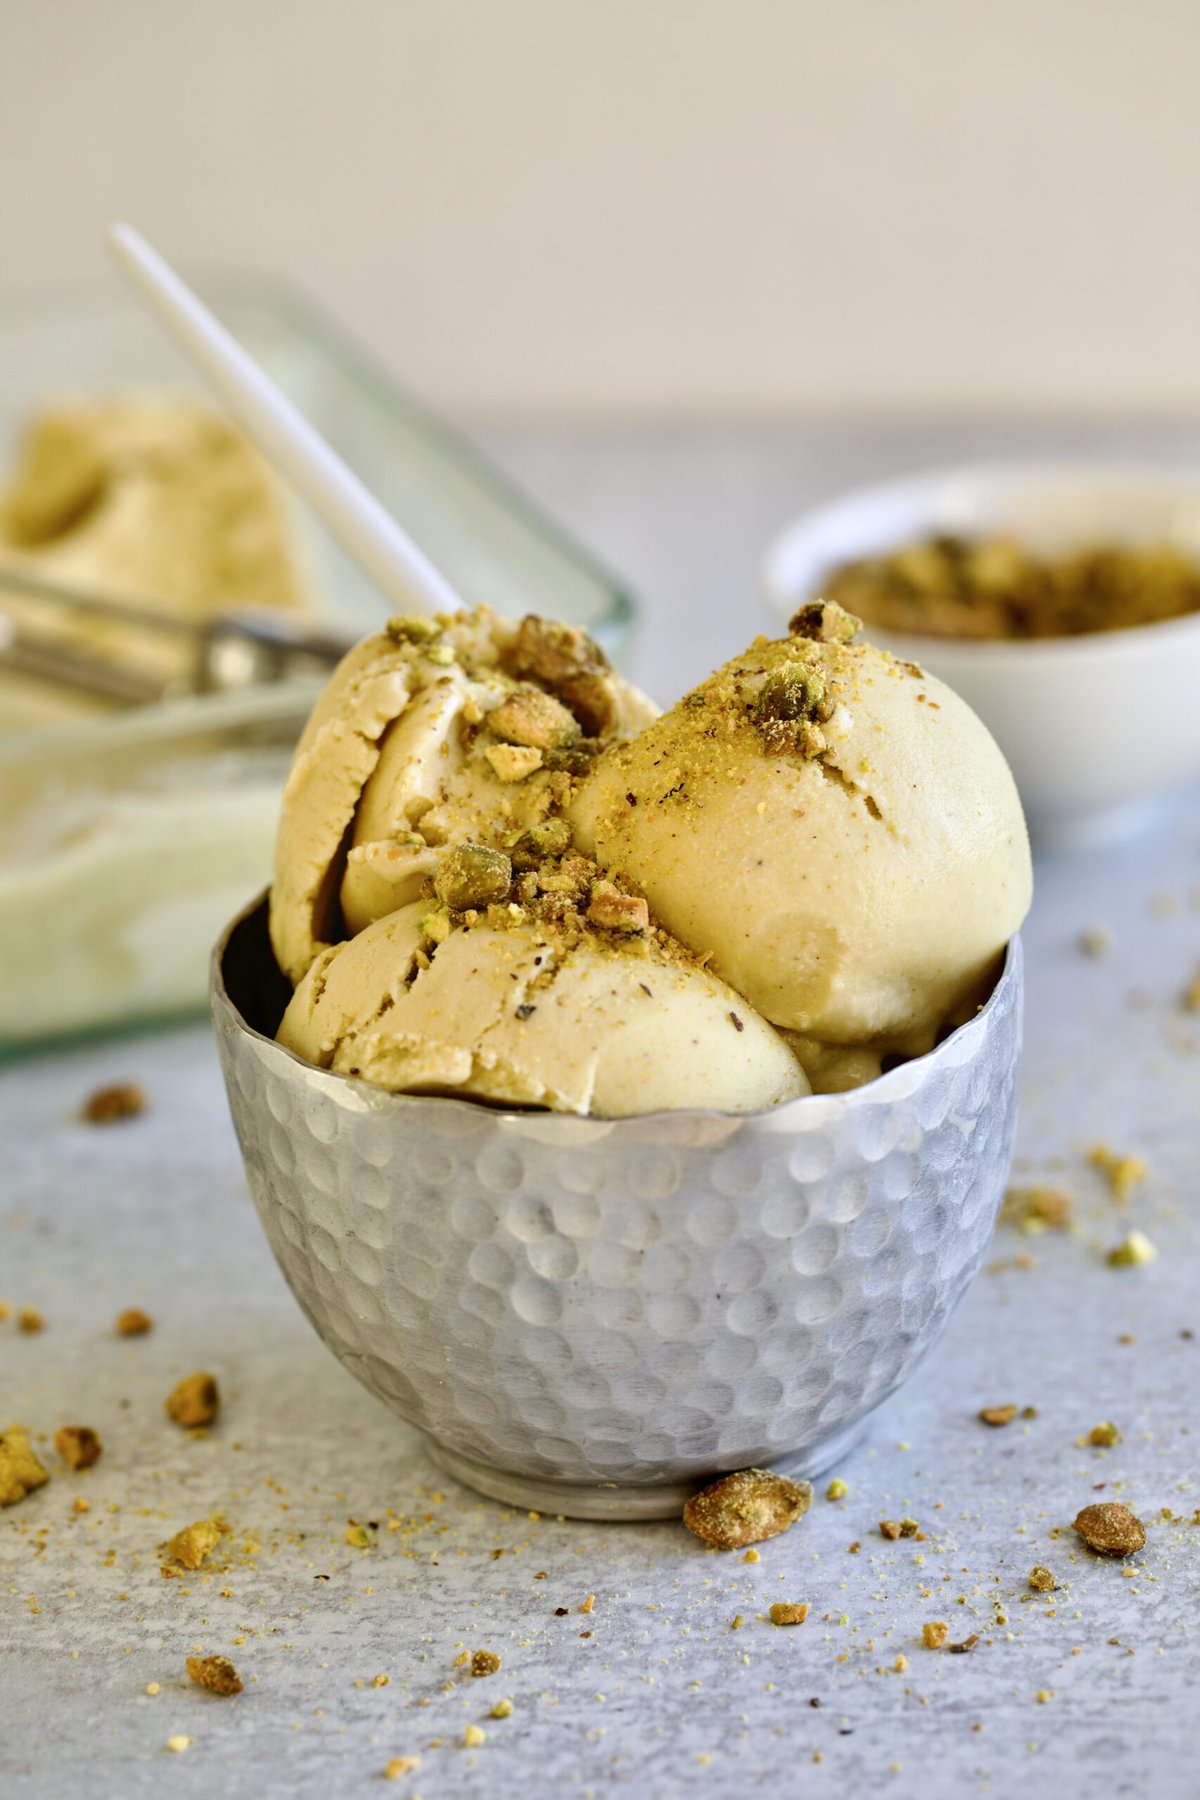 Italian pistachio gelato in a cup with a spoon.